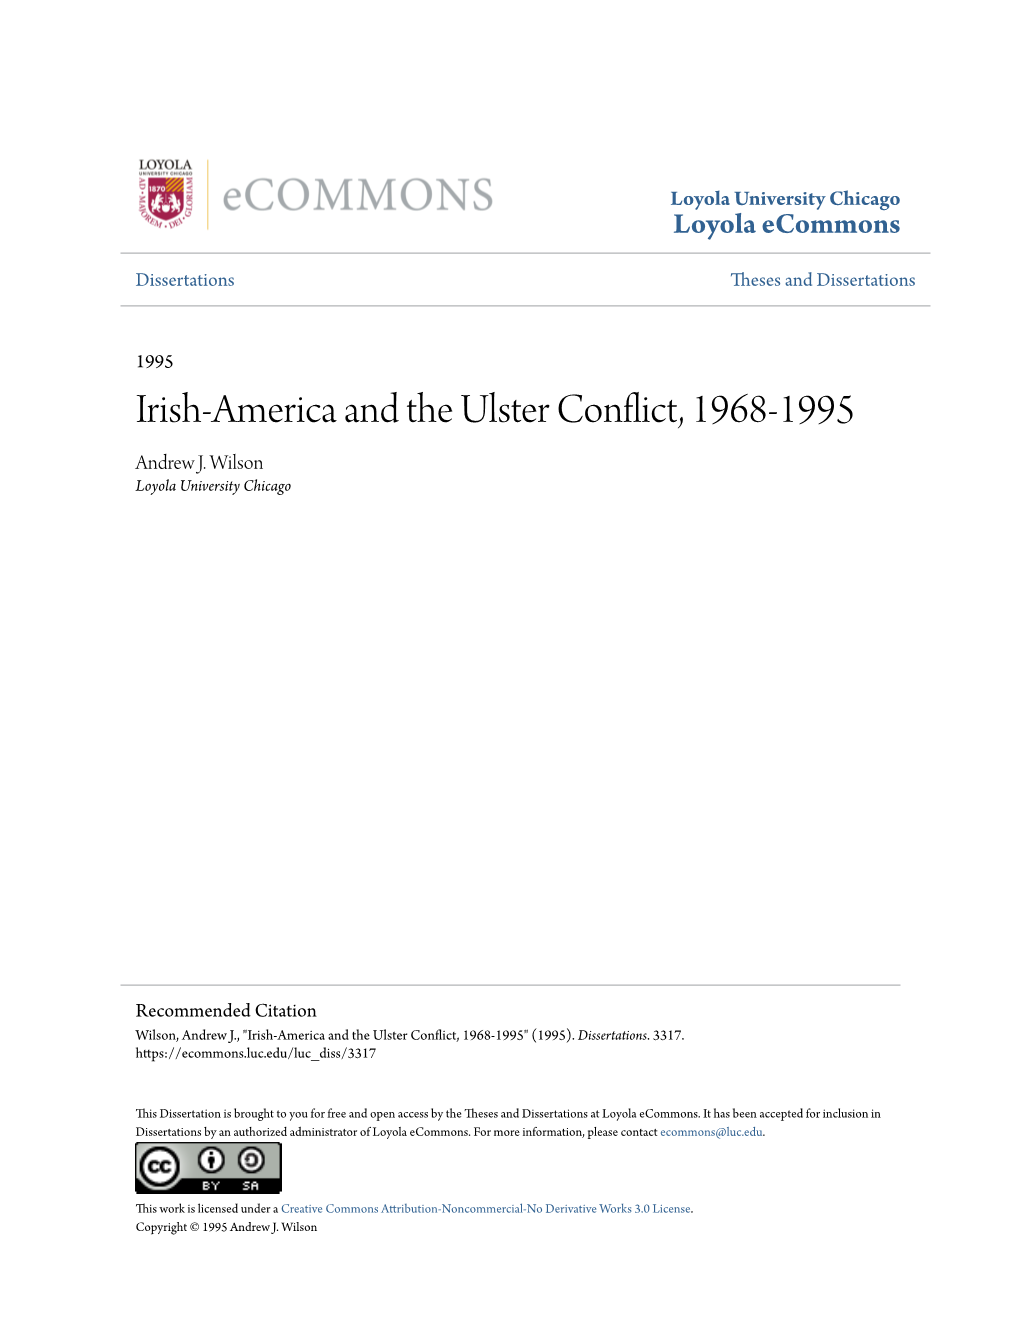 Irish-America and the Ulster Conflict, 1968-1995 Andrew J